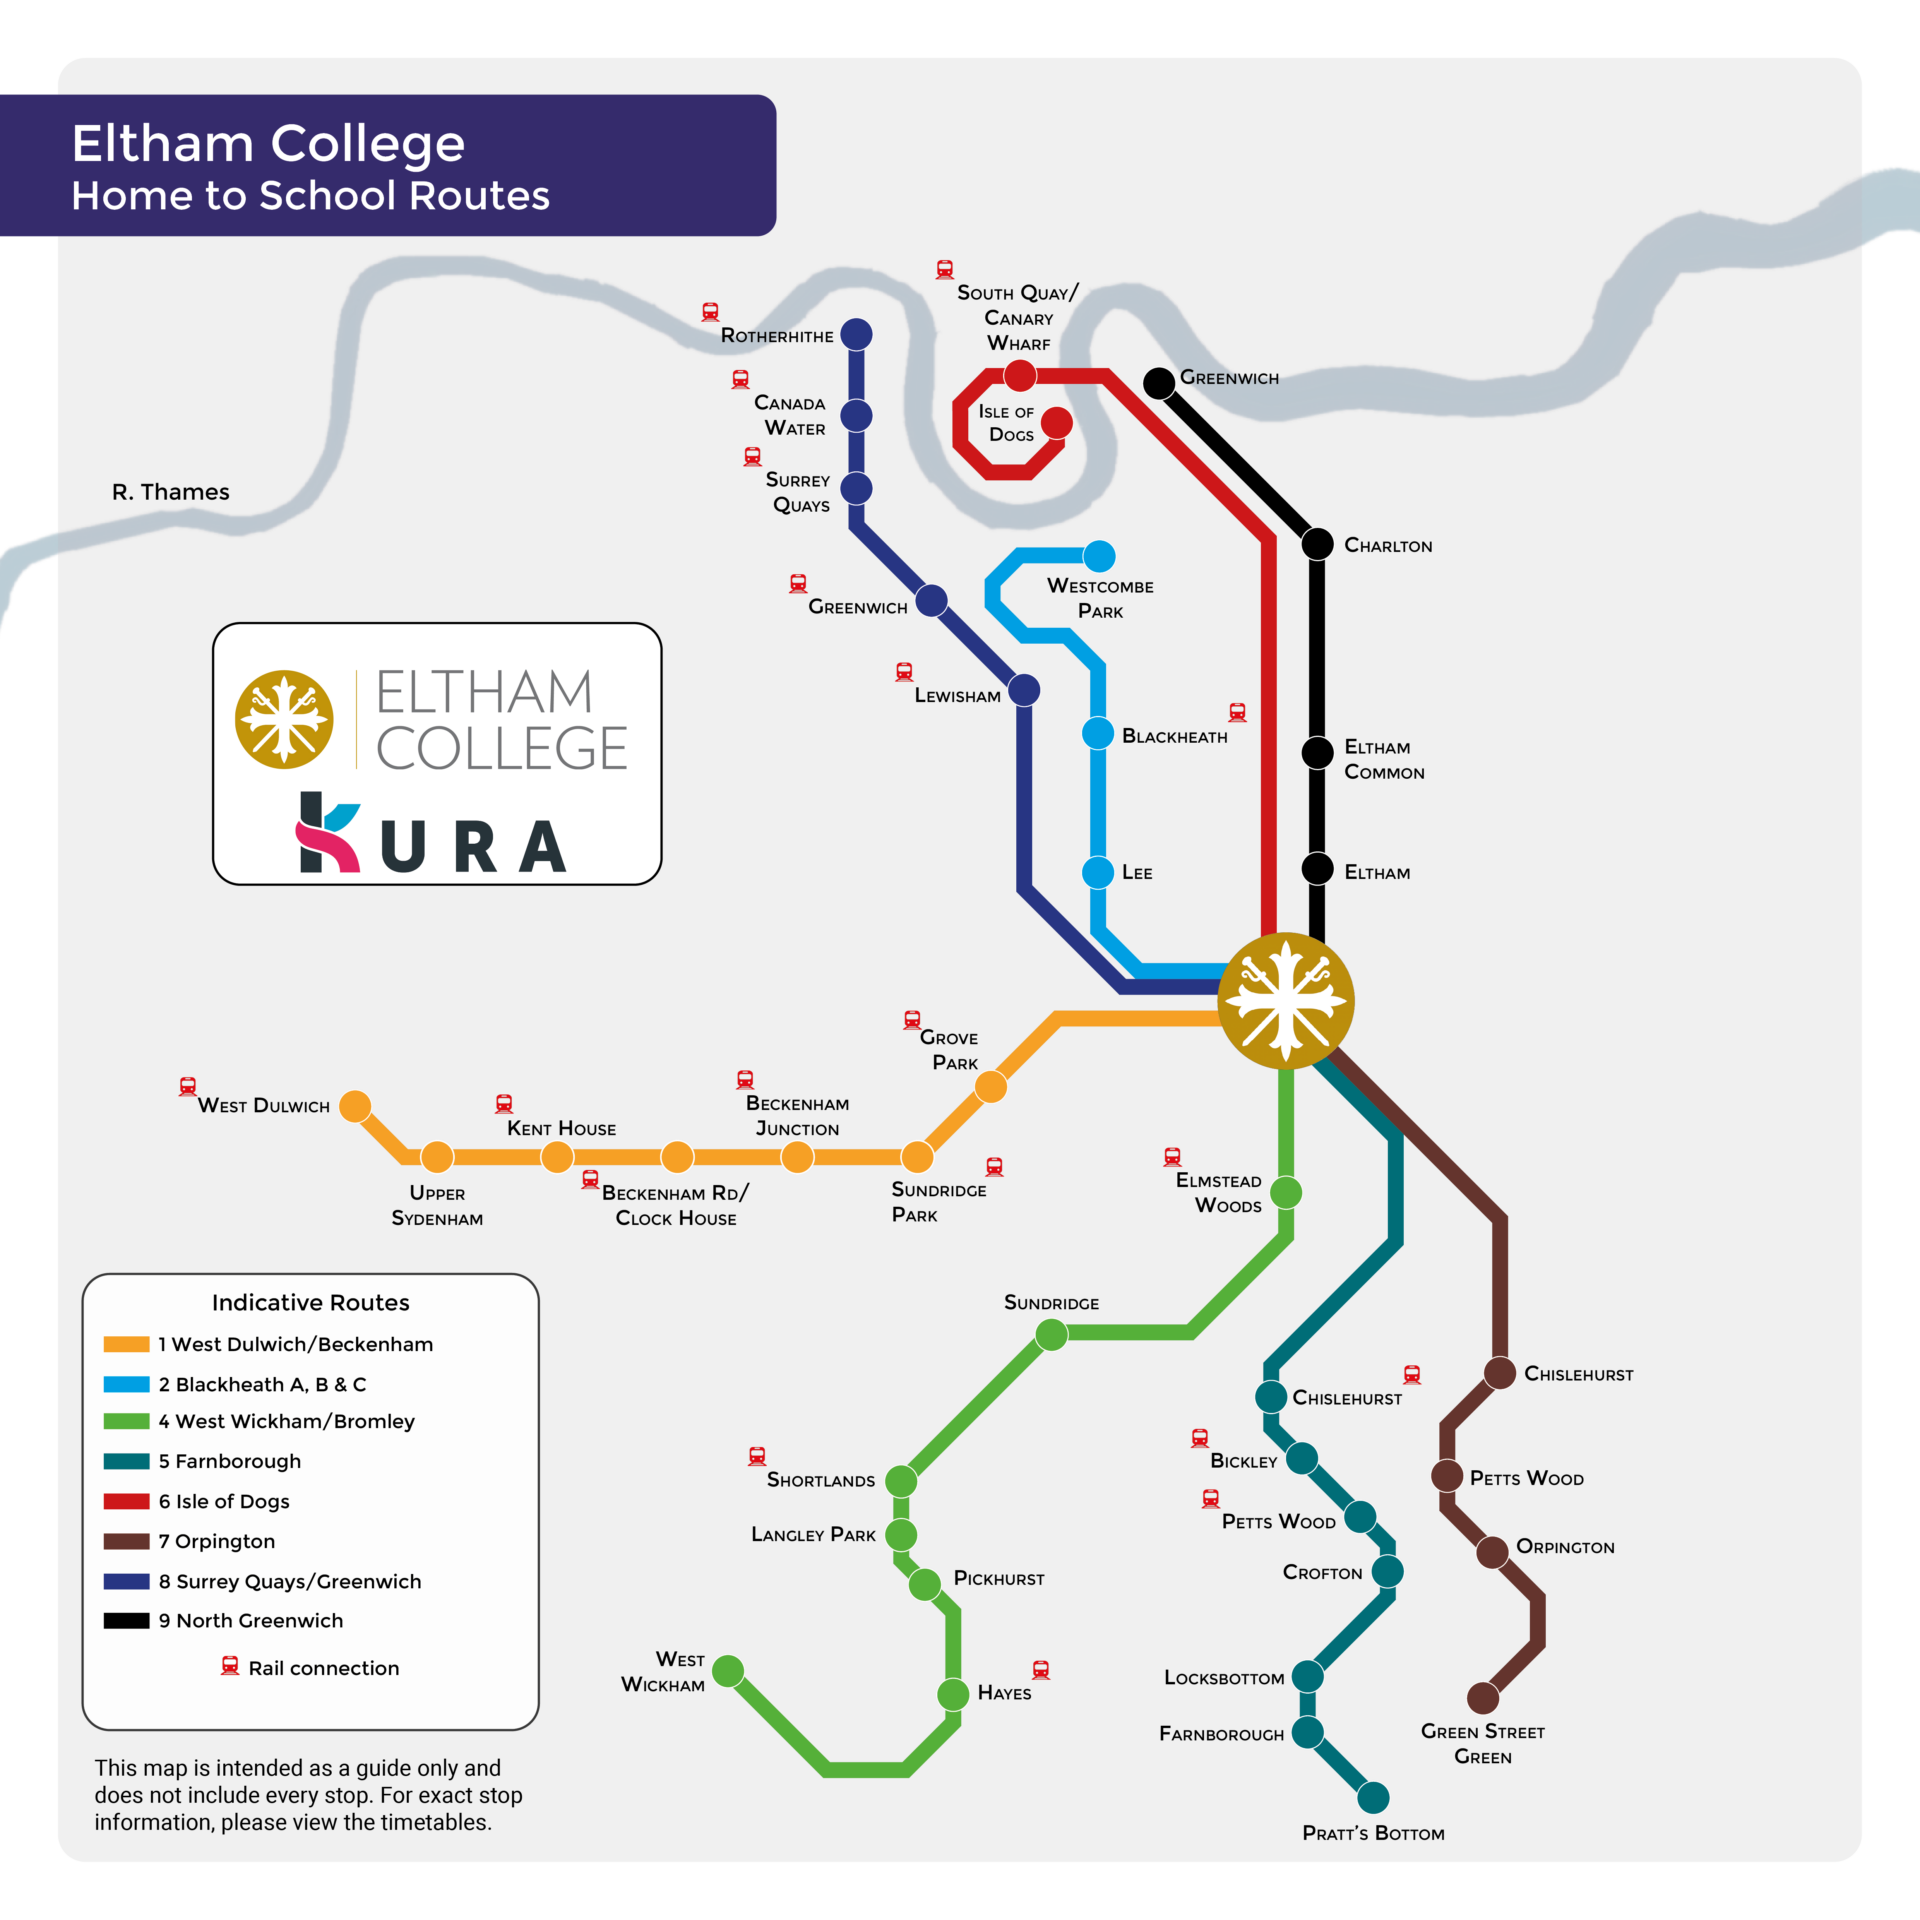 Map of Eltham College Home to School Routes